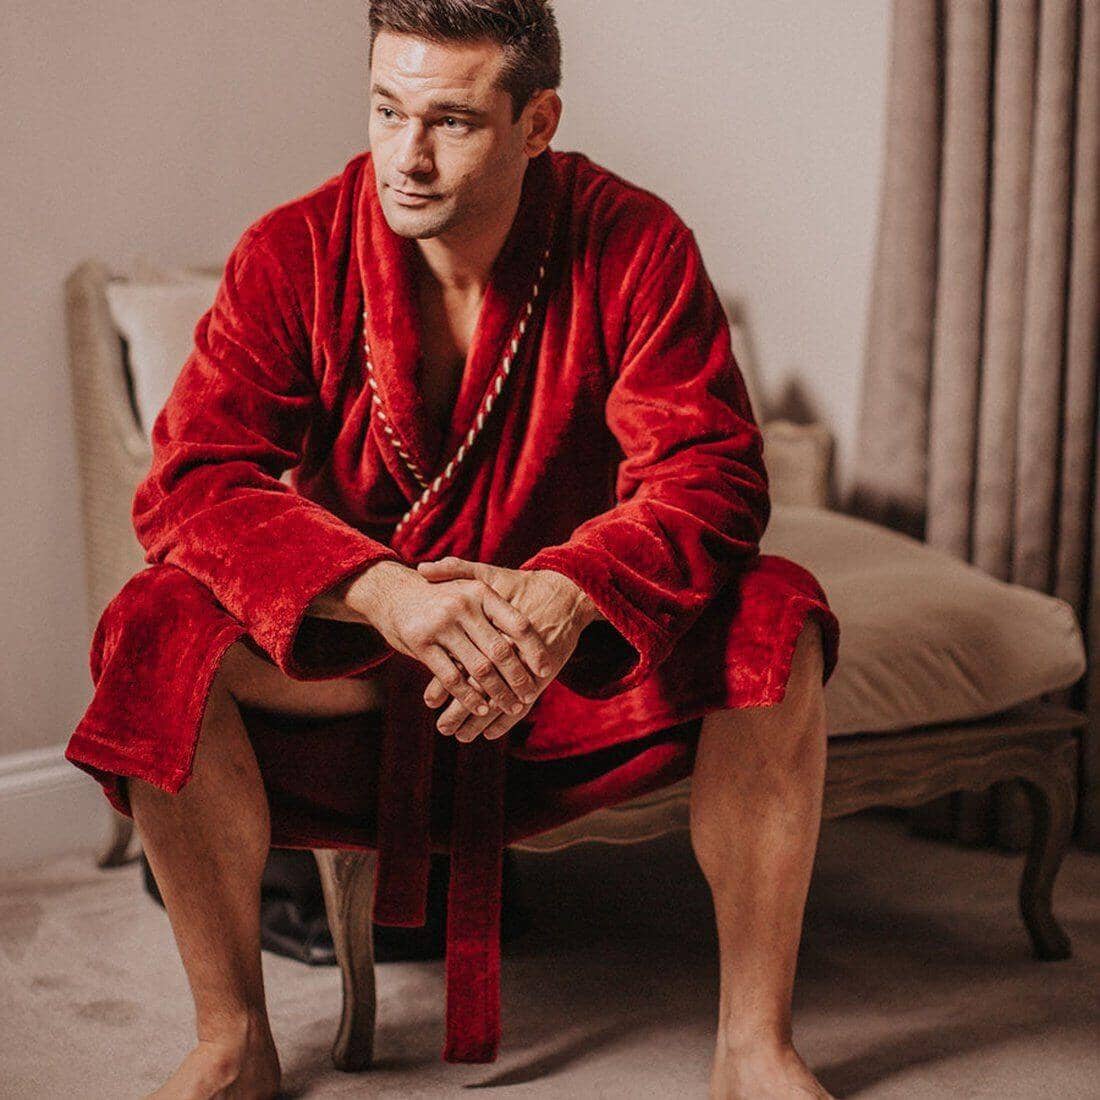 Lavish Men's Robes Fit for a King │ Luxury Spa Robes | Luxury Spa Robes